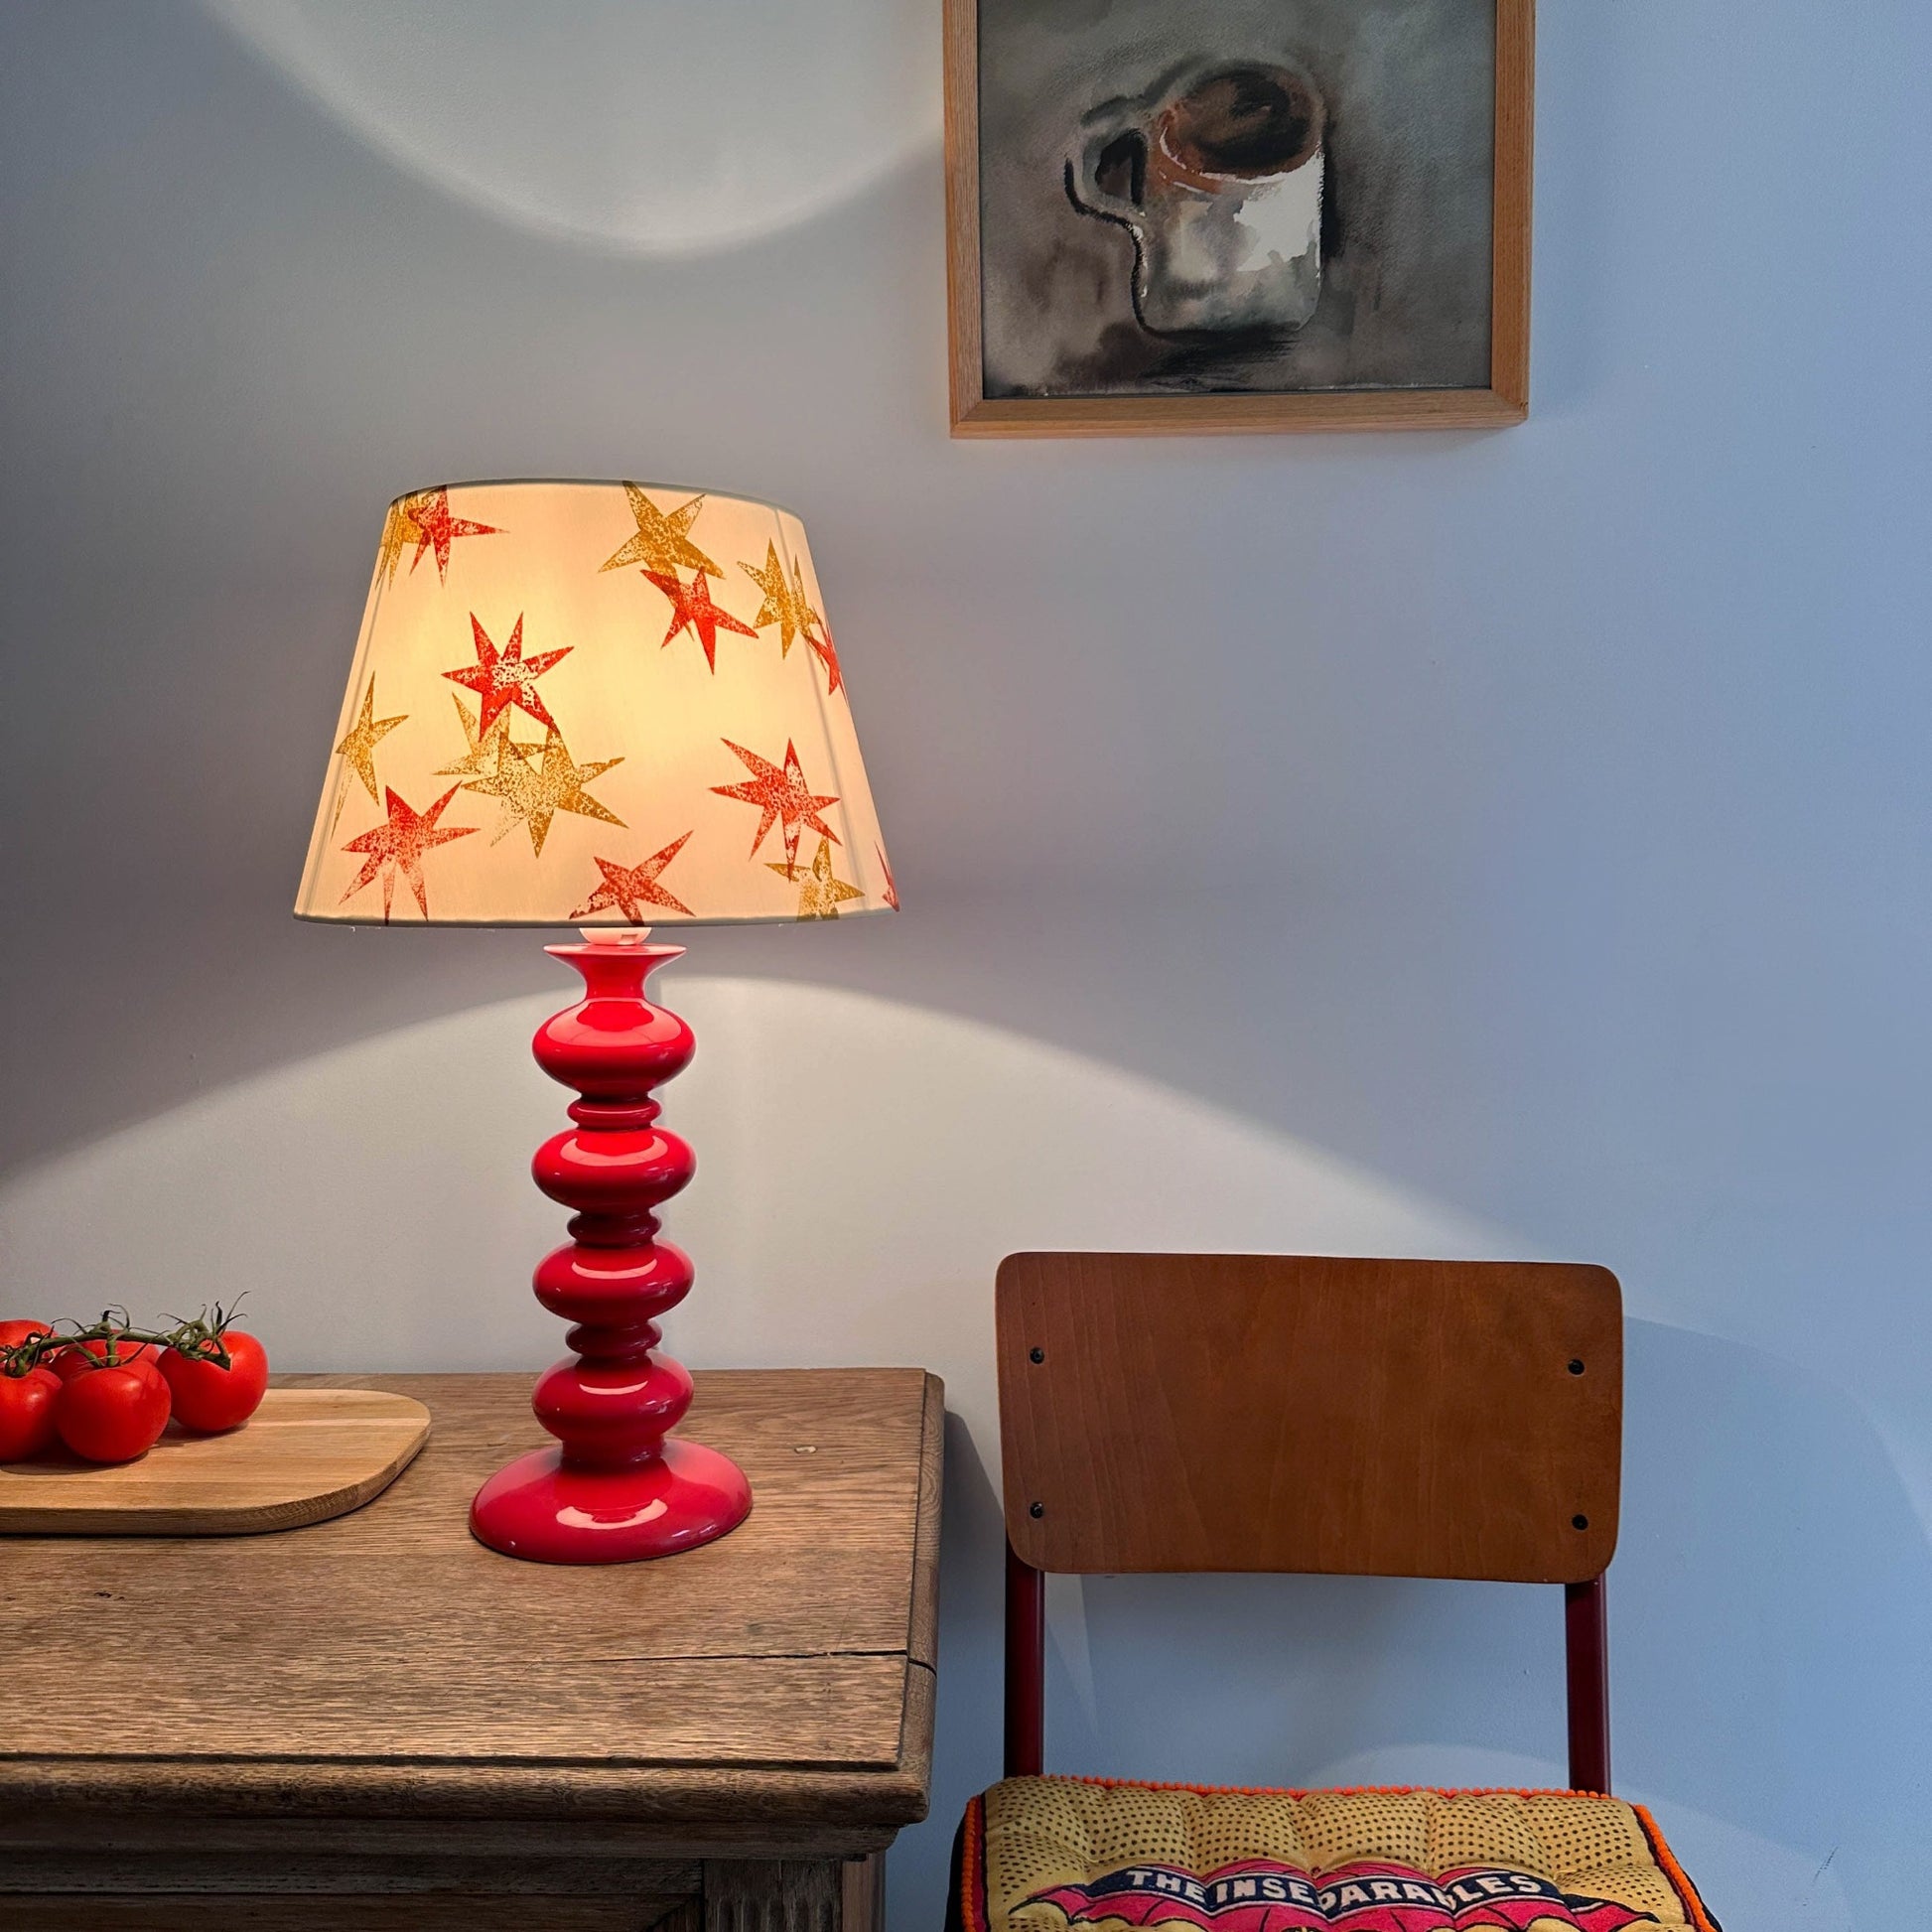 Cream lampshade with orange and yellow stars on a red lamp with light on